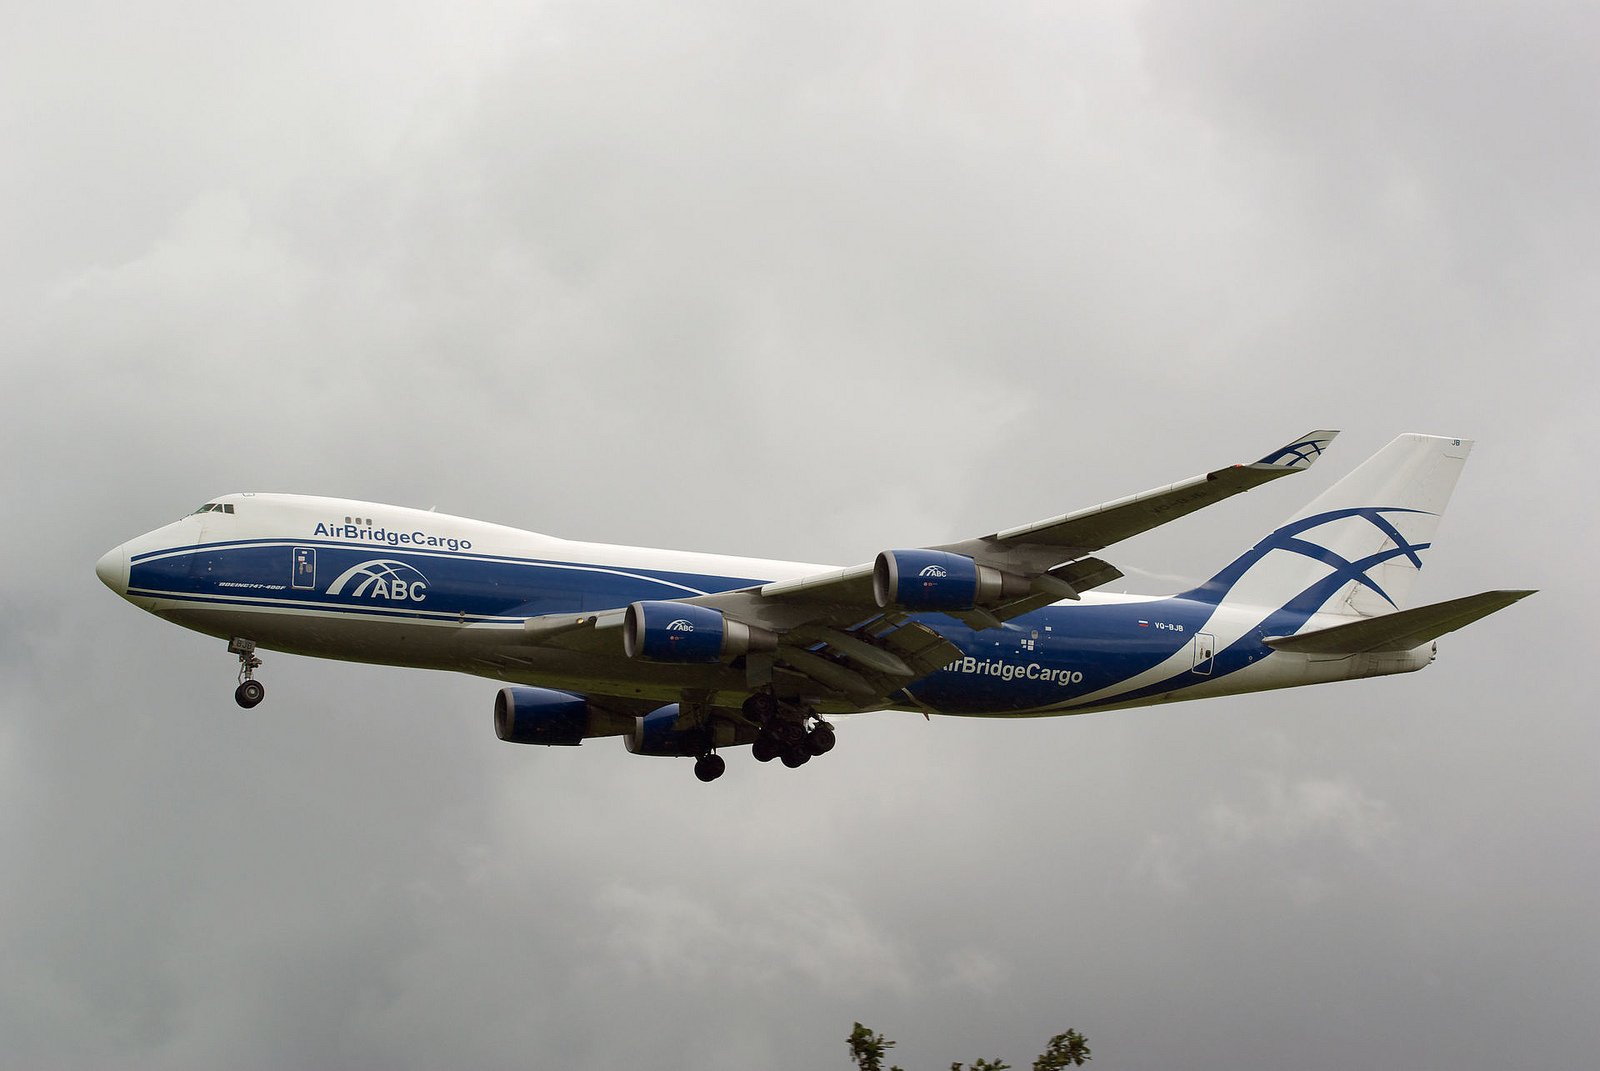 aicrafts, Boeing, 747, Airports, Jet, Sky, Transports, Cargo Wallpaper